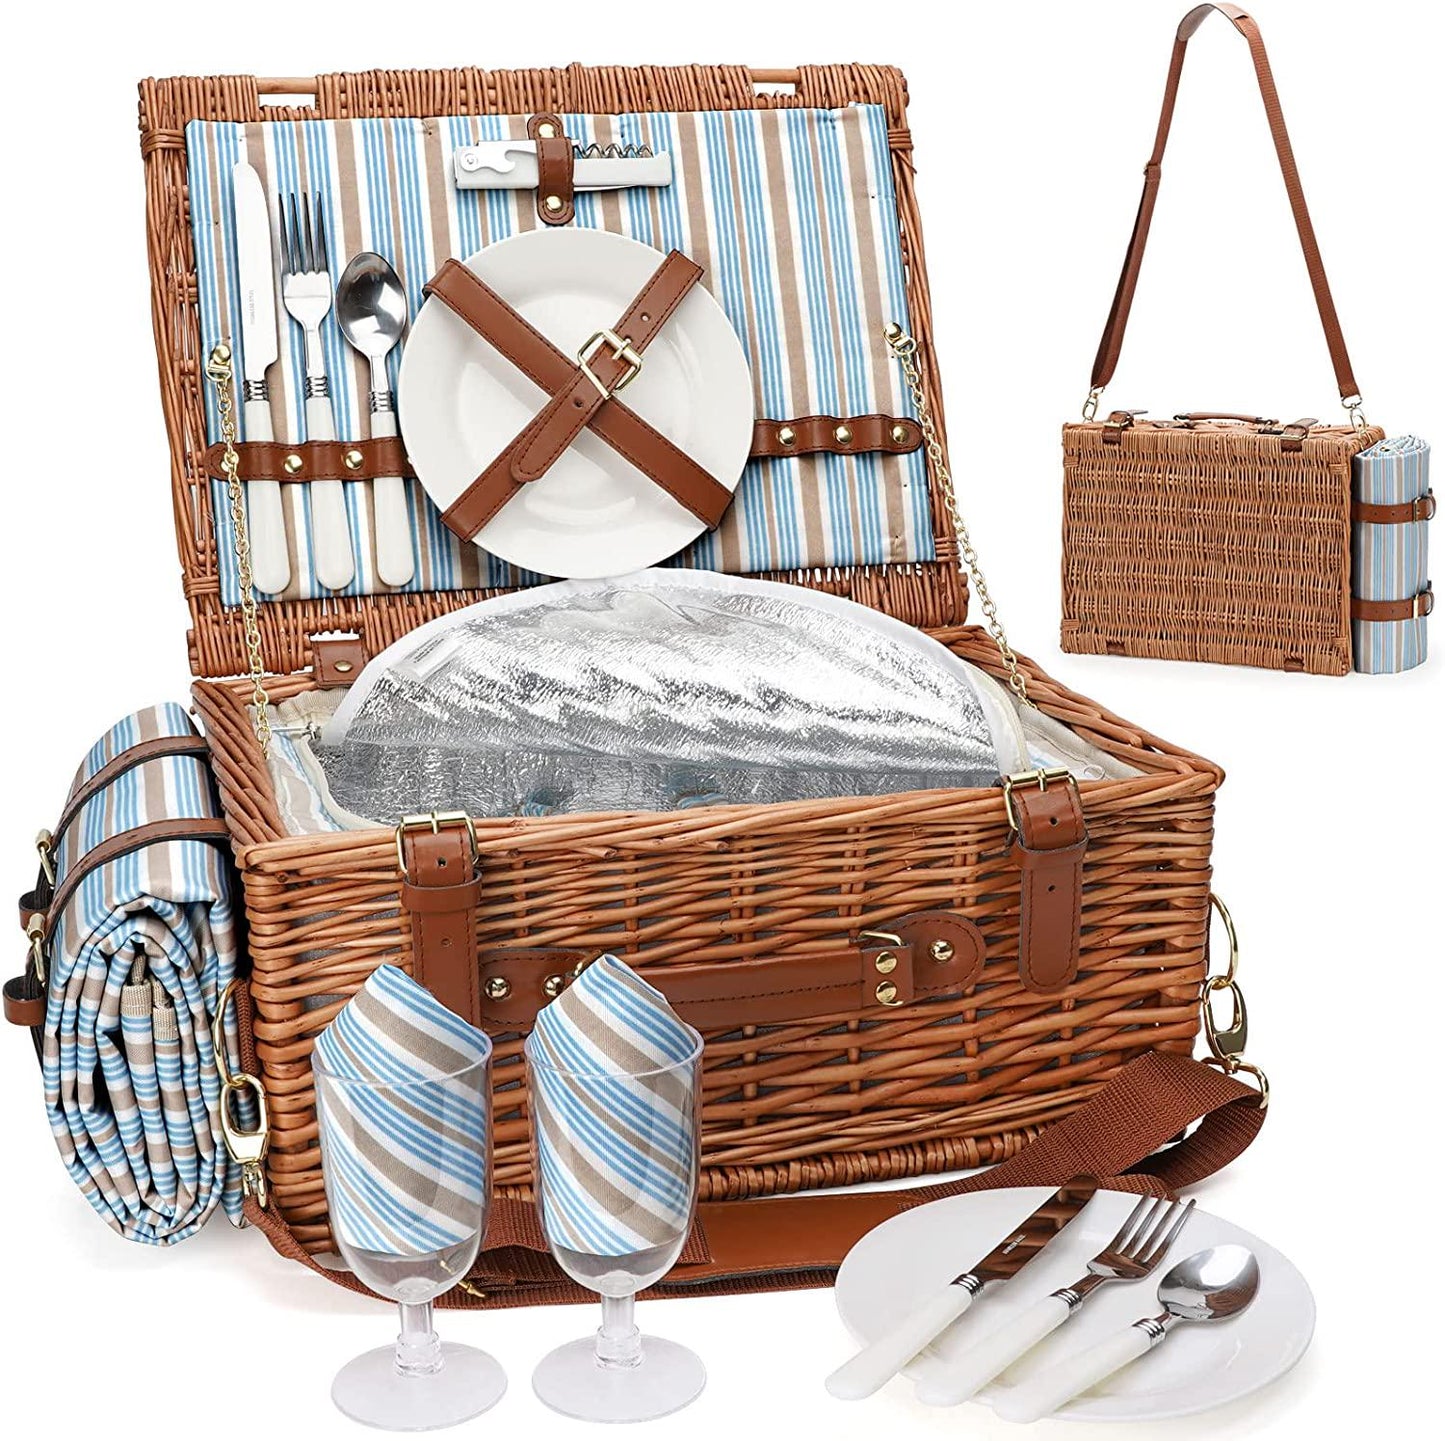 Picnic Cooler Basket Set for 2 Persons with Large Waterproof Picnic Blanket, Cutlery Service Kit and Adjustable Strap-